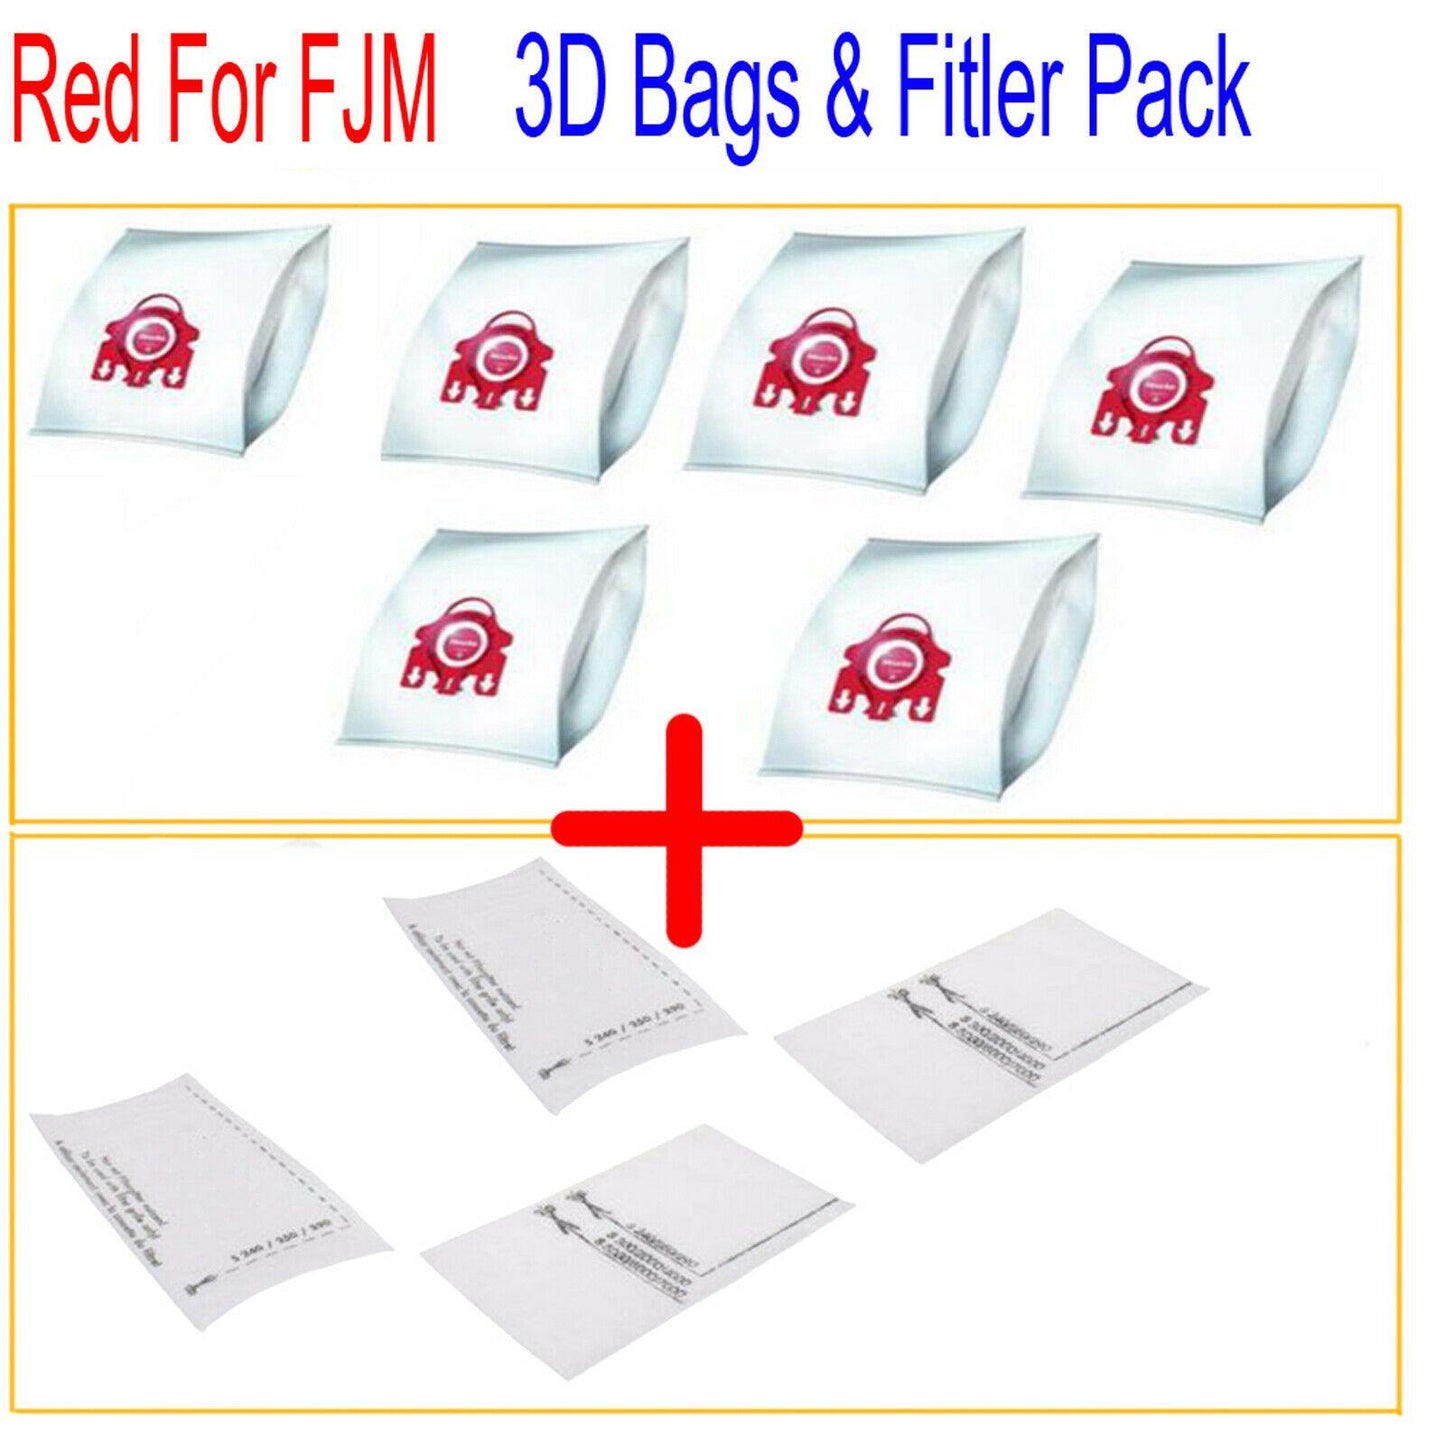 6 Synthetic Bags & 4 Filters For Miele S771 S772 S774 S778 Vacuum Cleaner 3D Sparesbarn